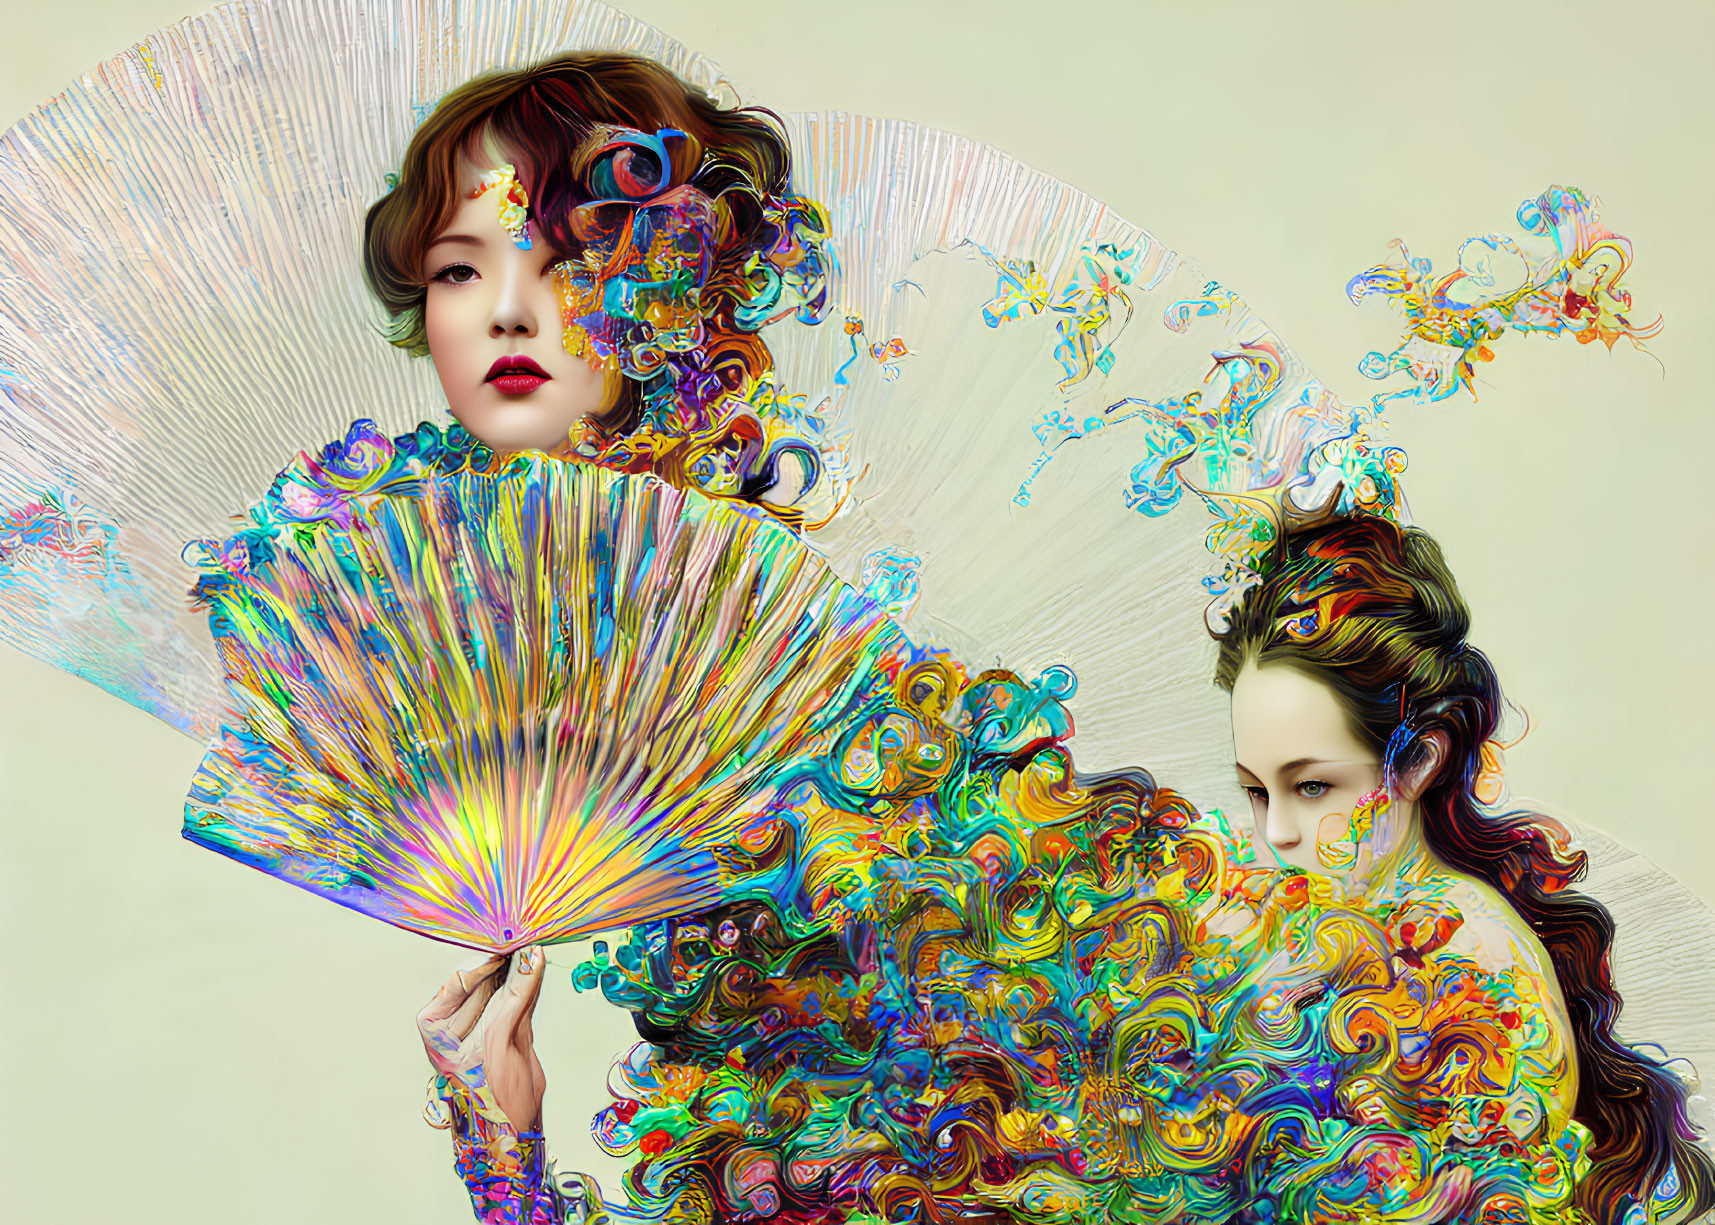 Colorful digital artwork of two women with ornate hair and clothing holding a patterned fan